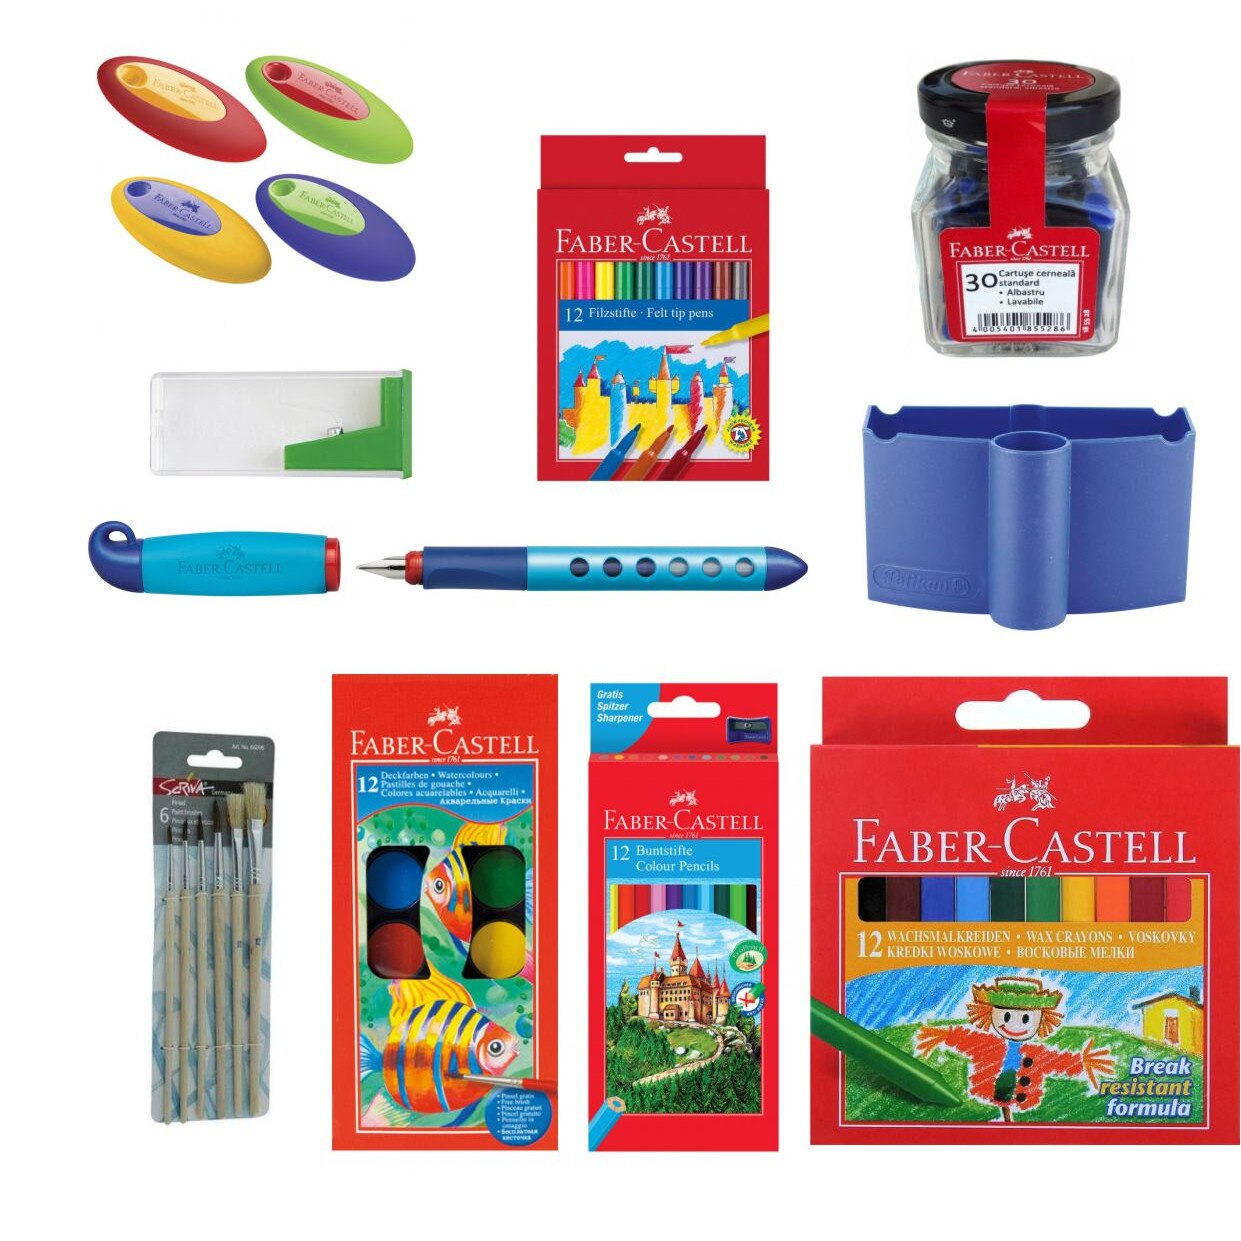 ice Youth goose Set rechizite scolare Faber-Castell - Baieti + Sort pictura - eMAG.ro